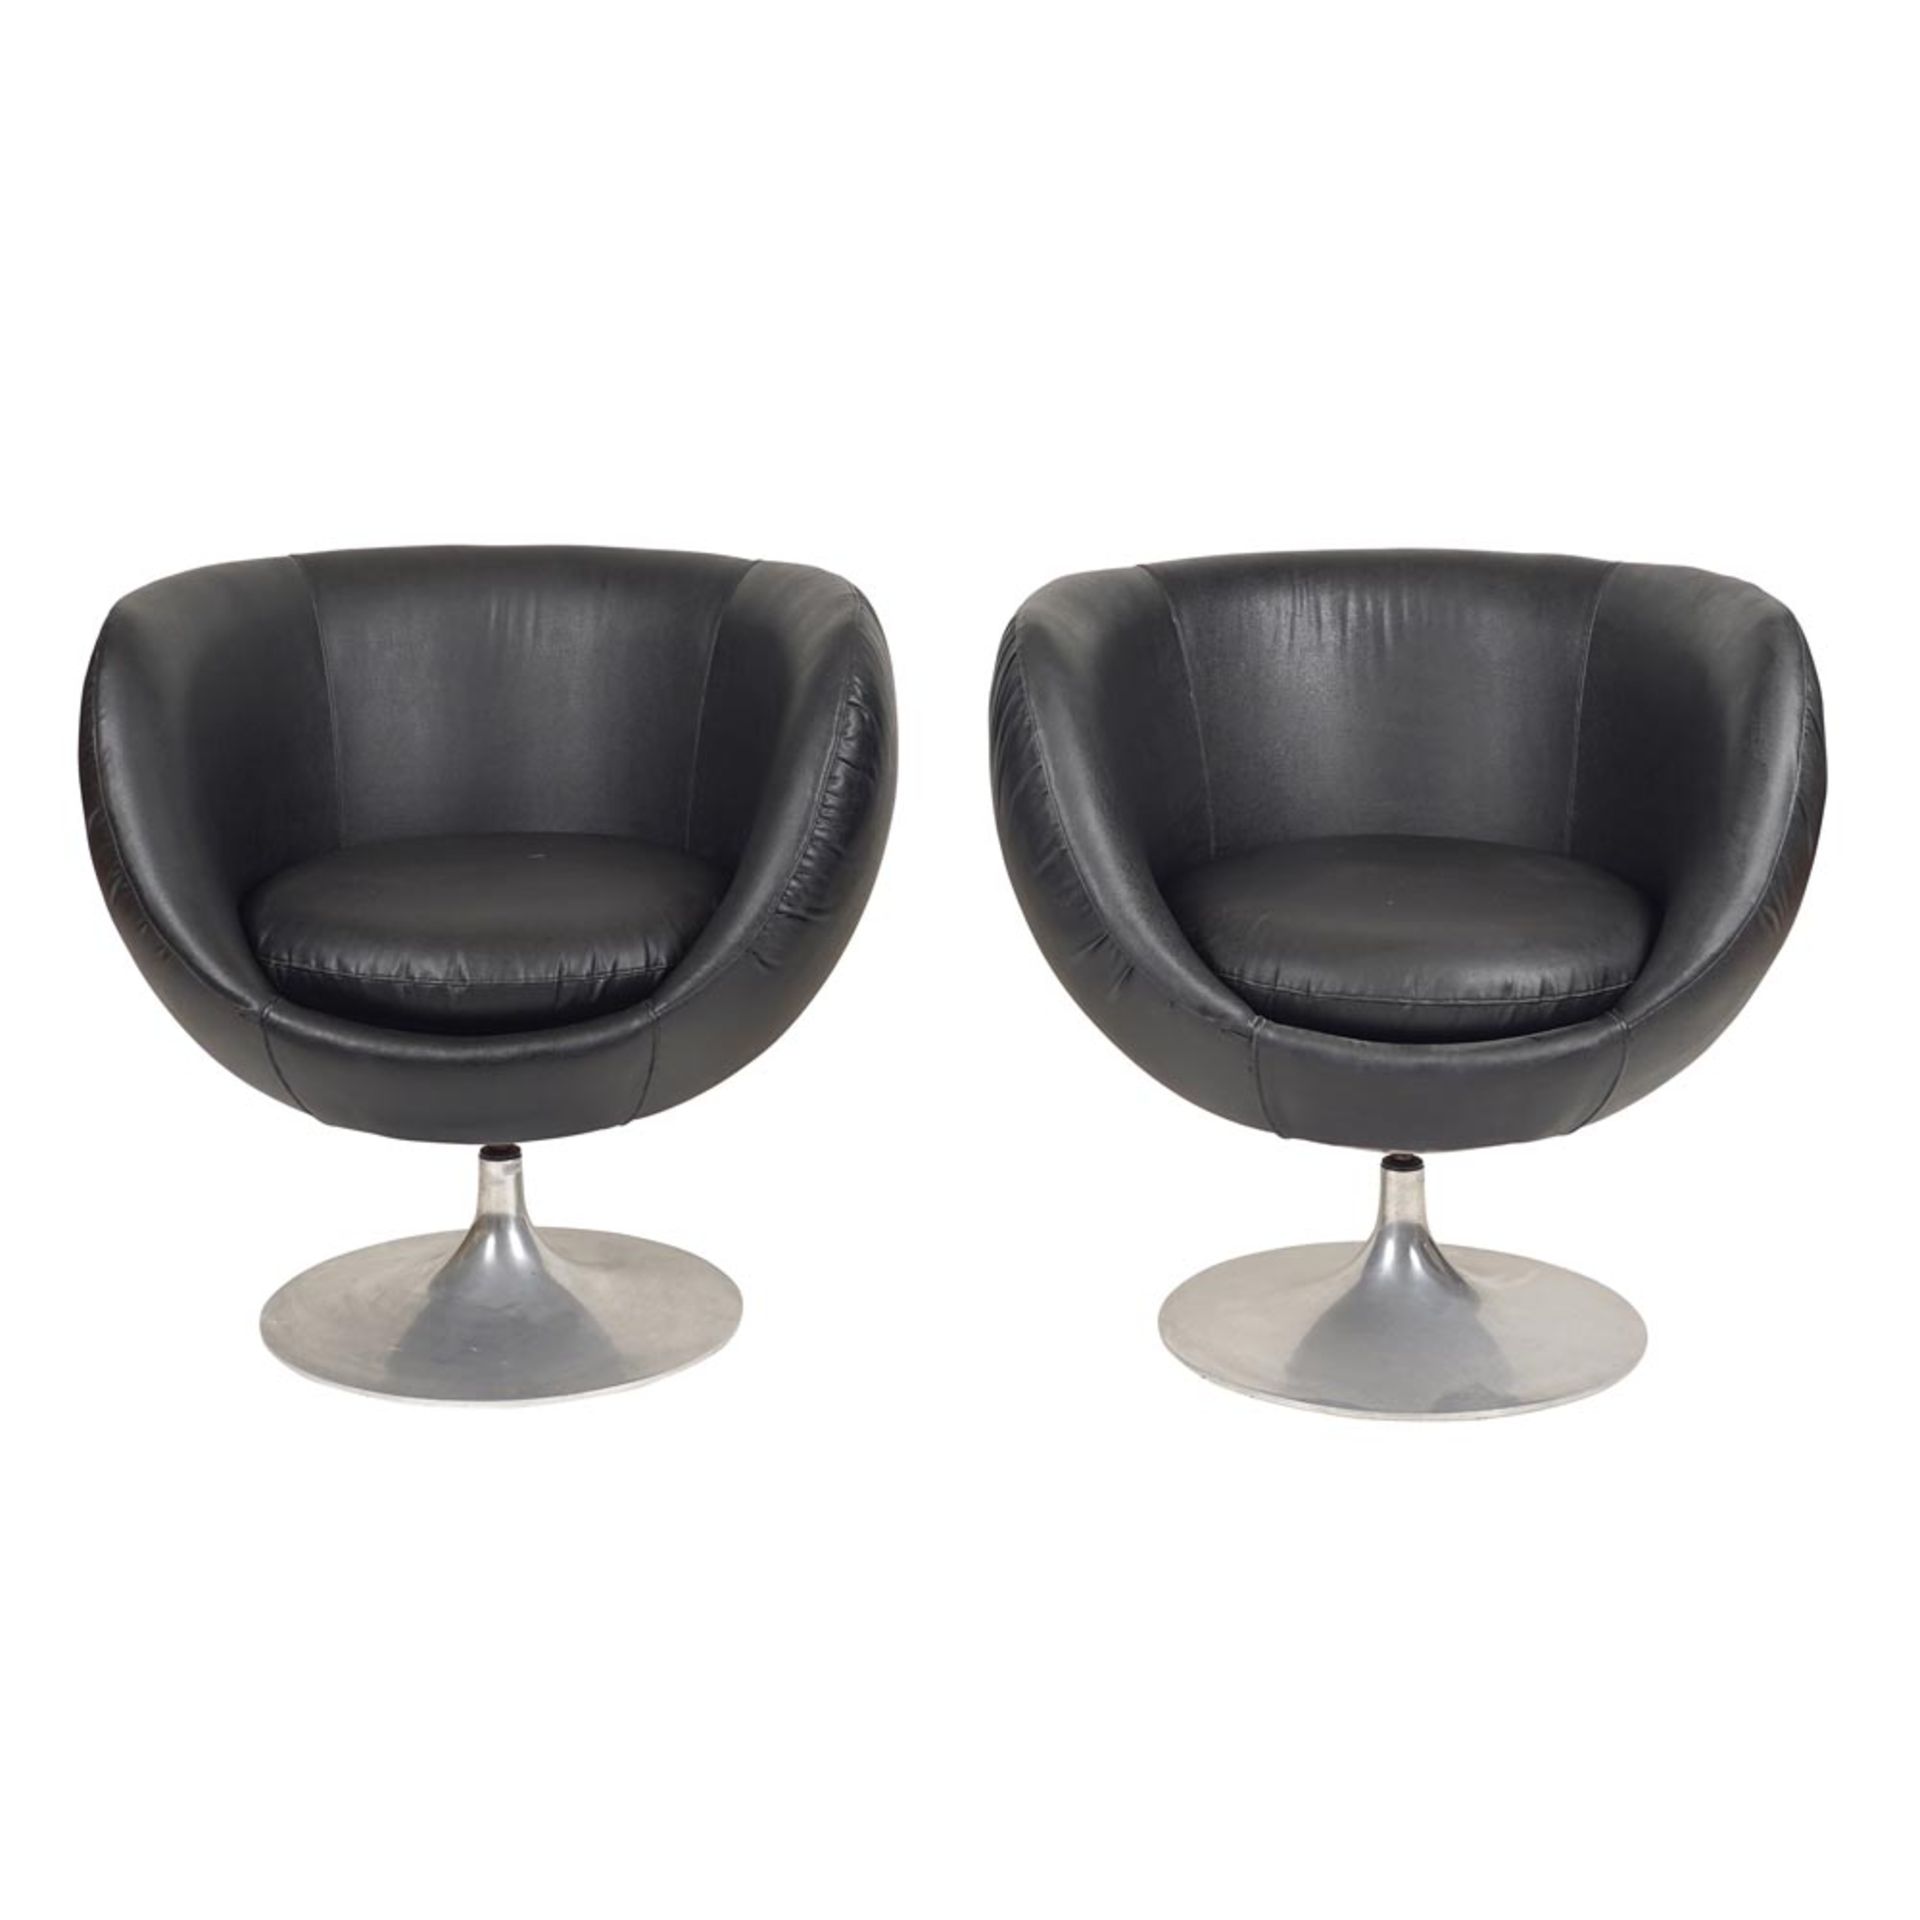 A pair of vintage eco-friendly leather revolving armchairs Italy, '70ies 71x64x54 cm.